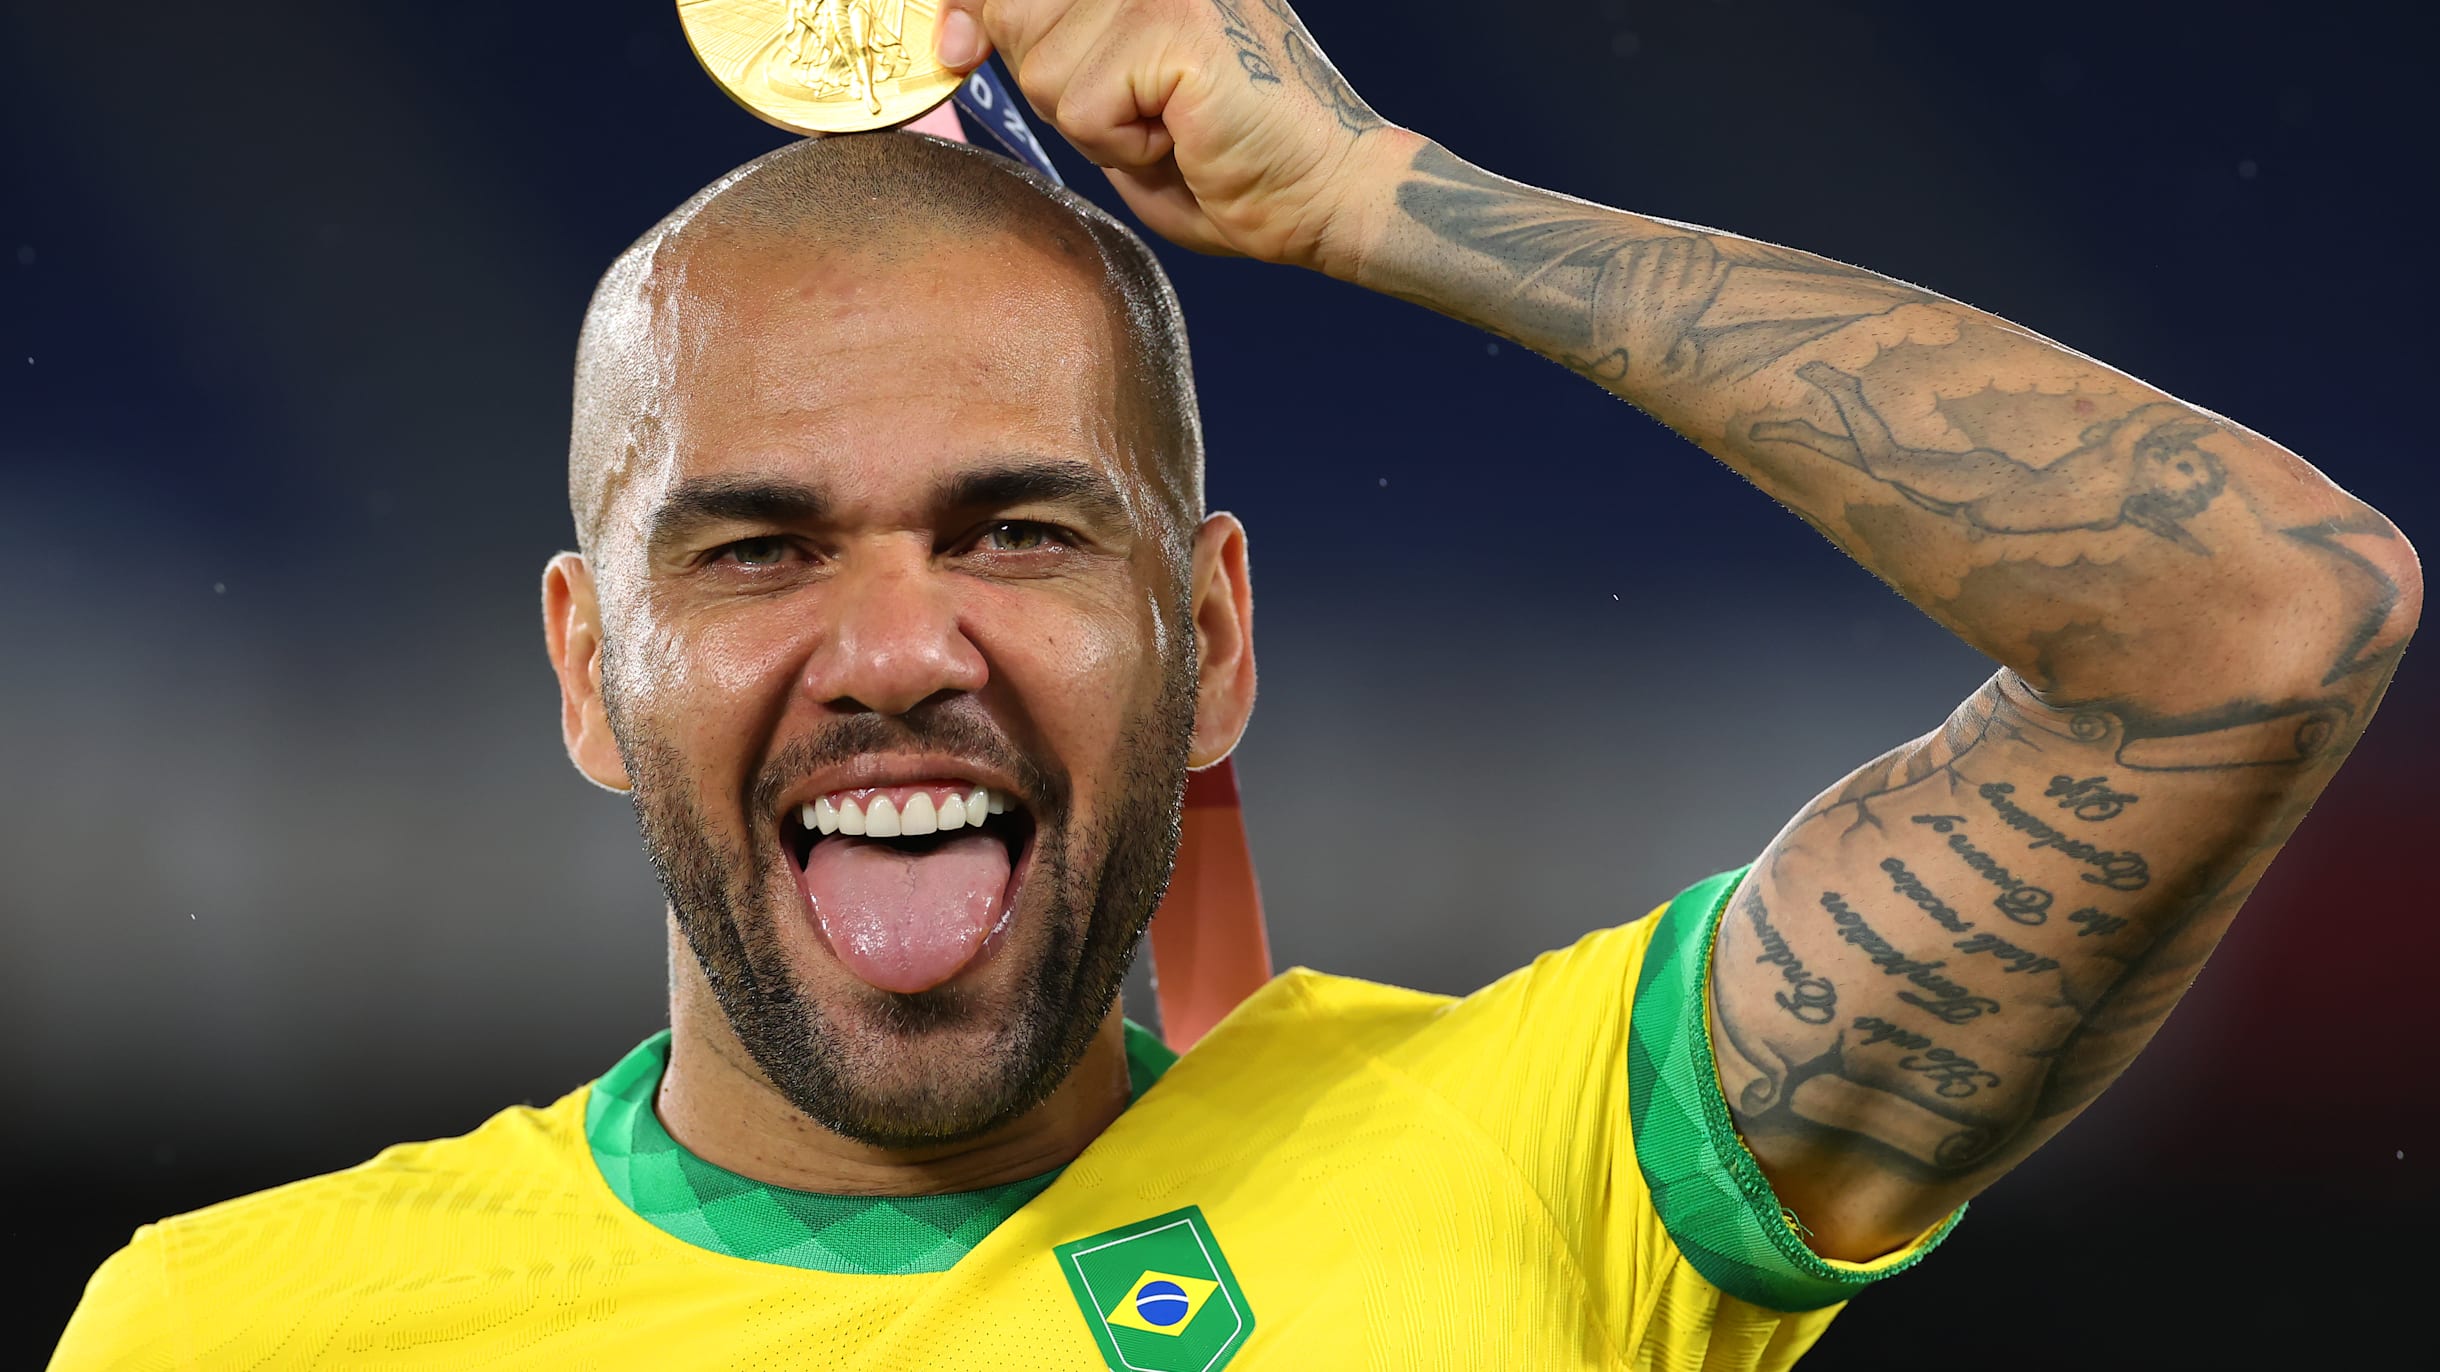 Dani Alves: 'I love this game. I loved football when they didn't pay me', World Cup 2022